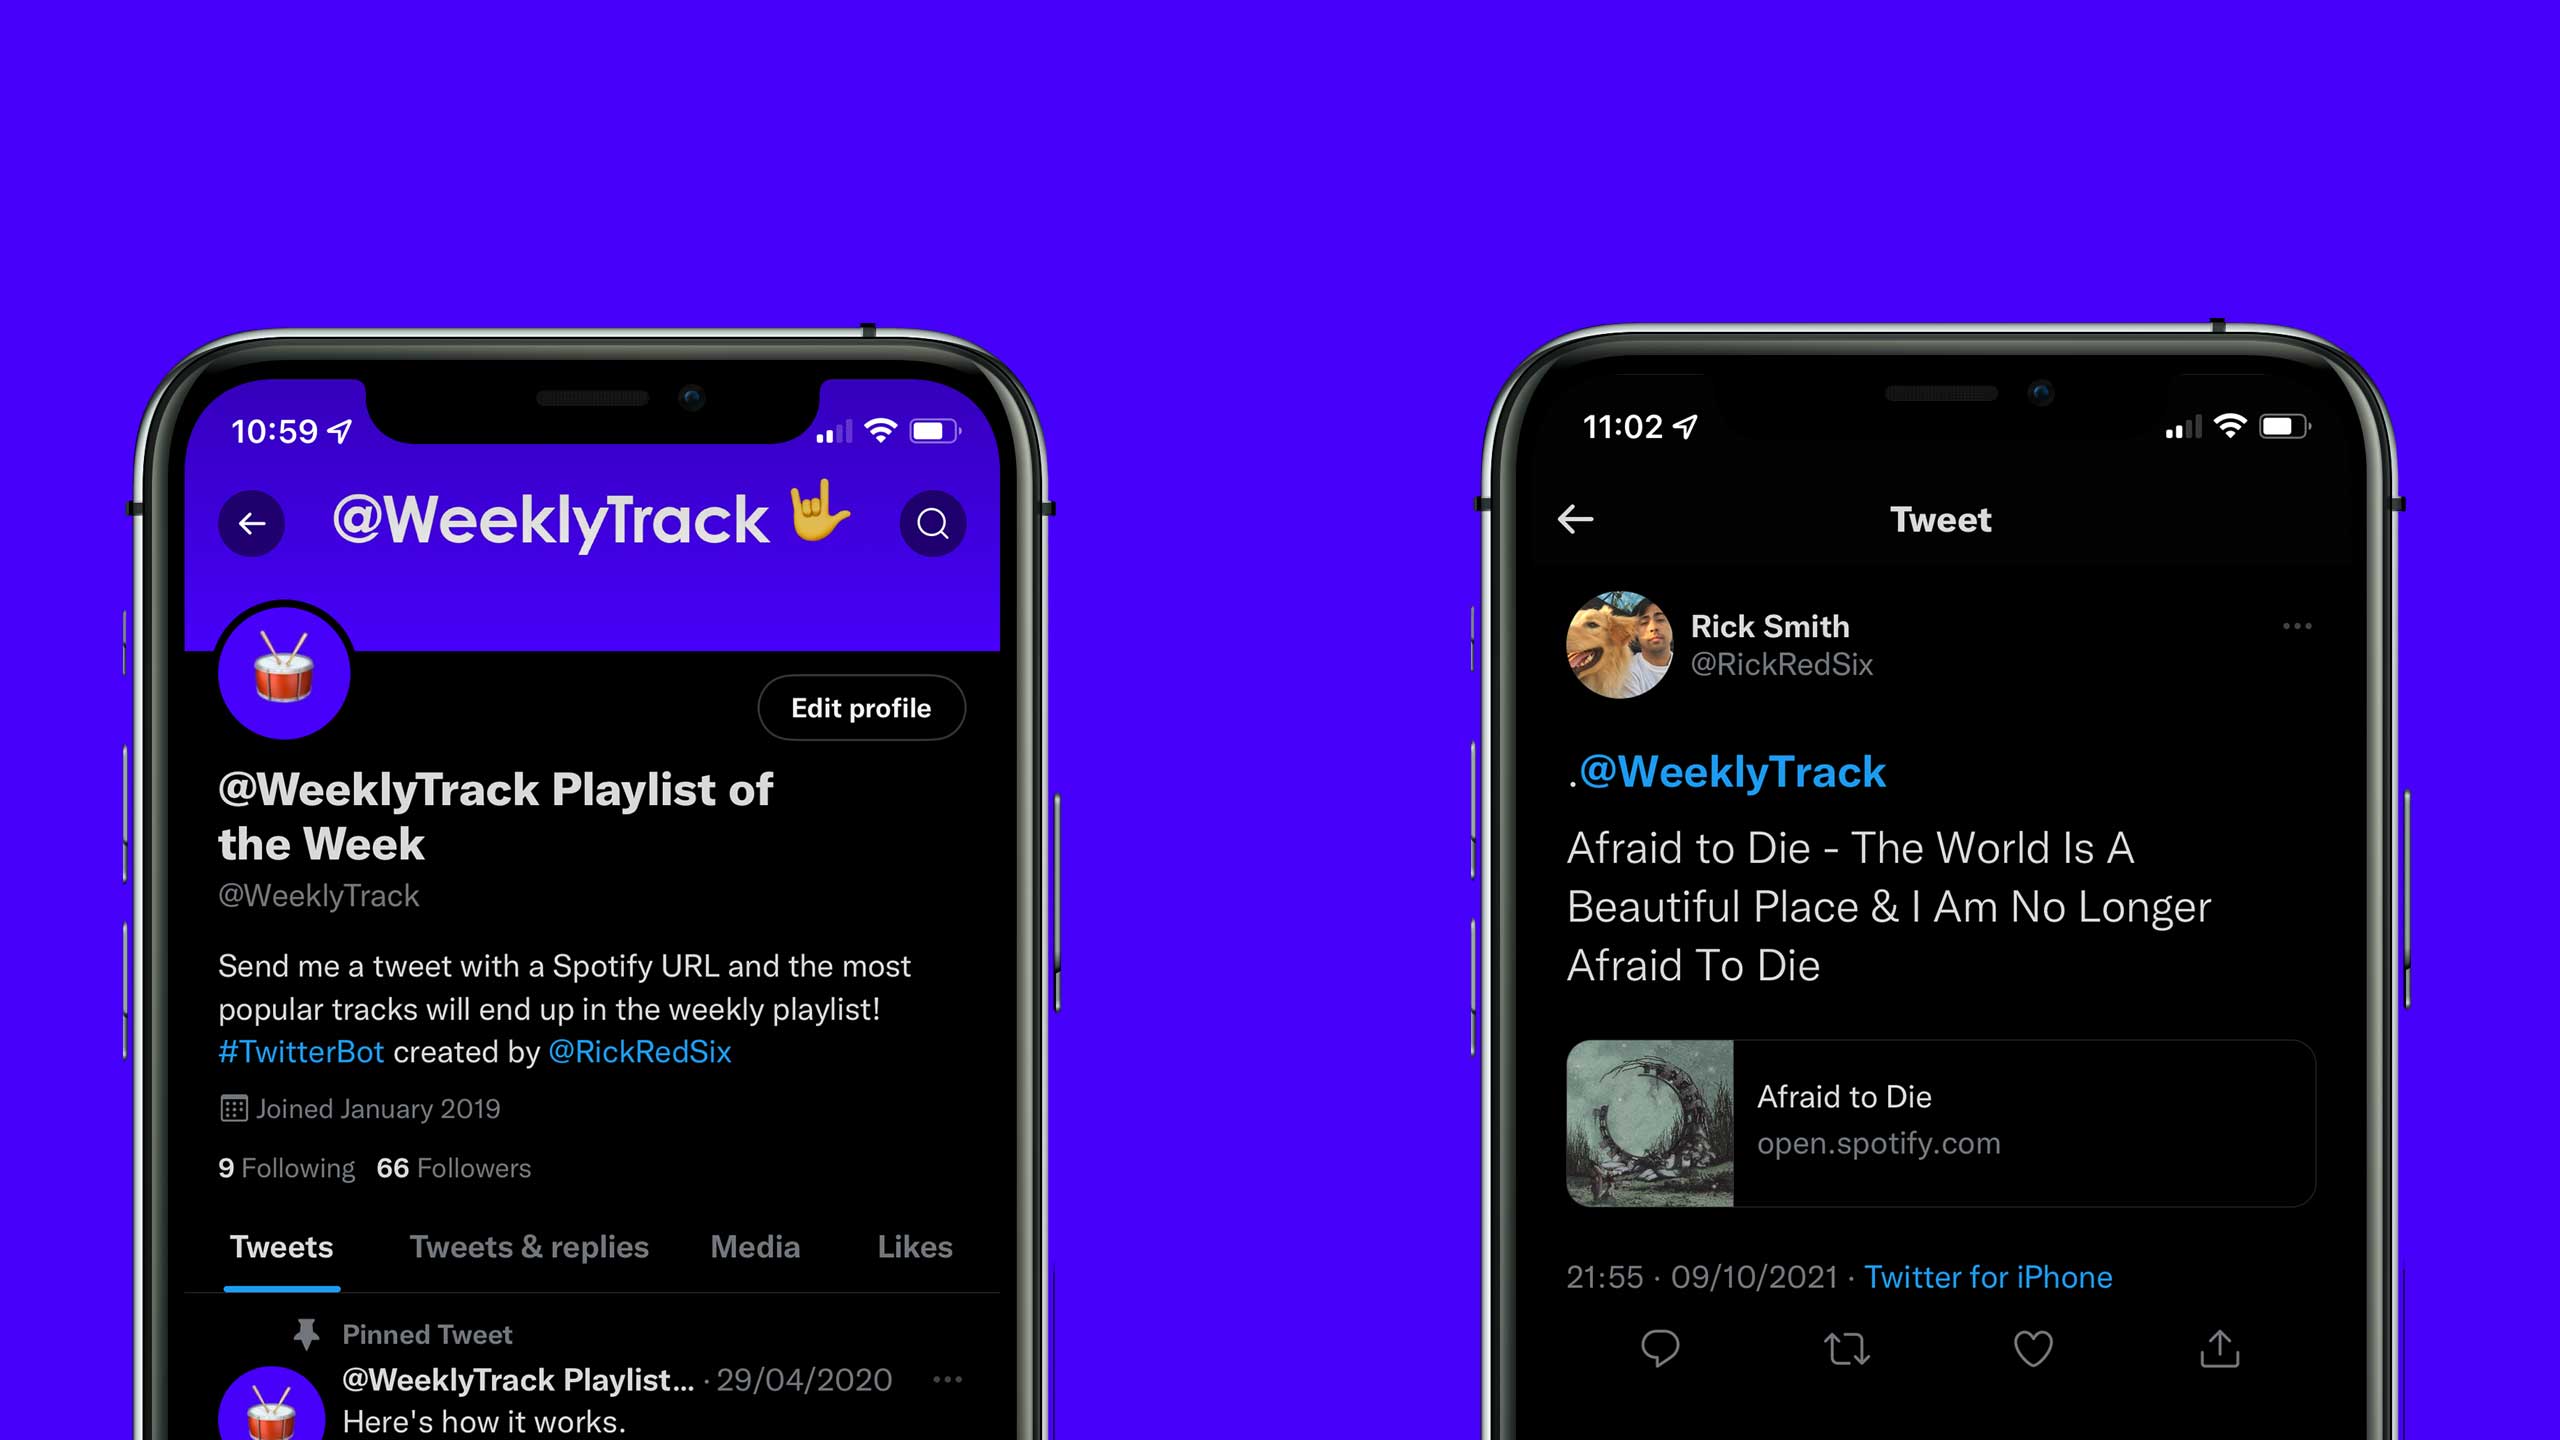 Phones displaying the Weekly Track Twitter account